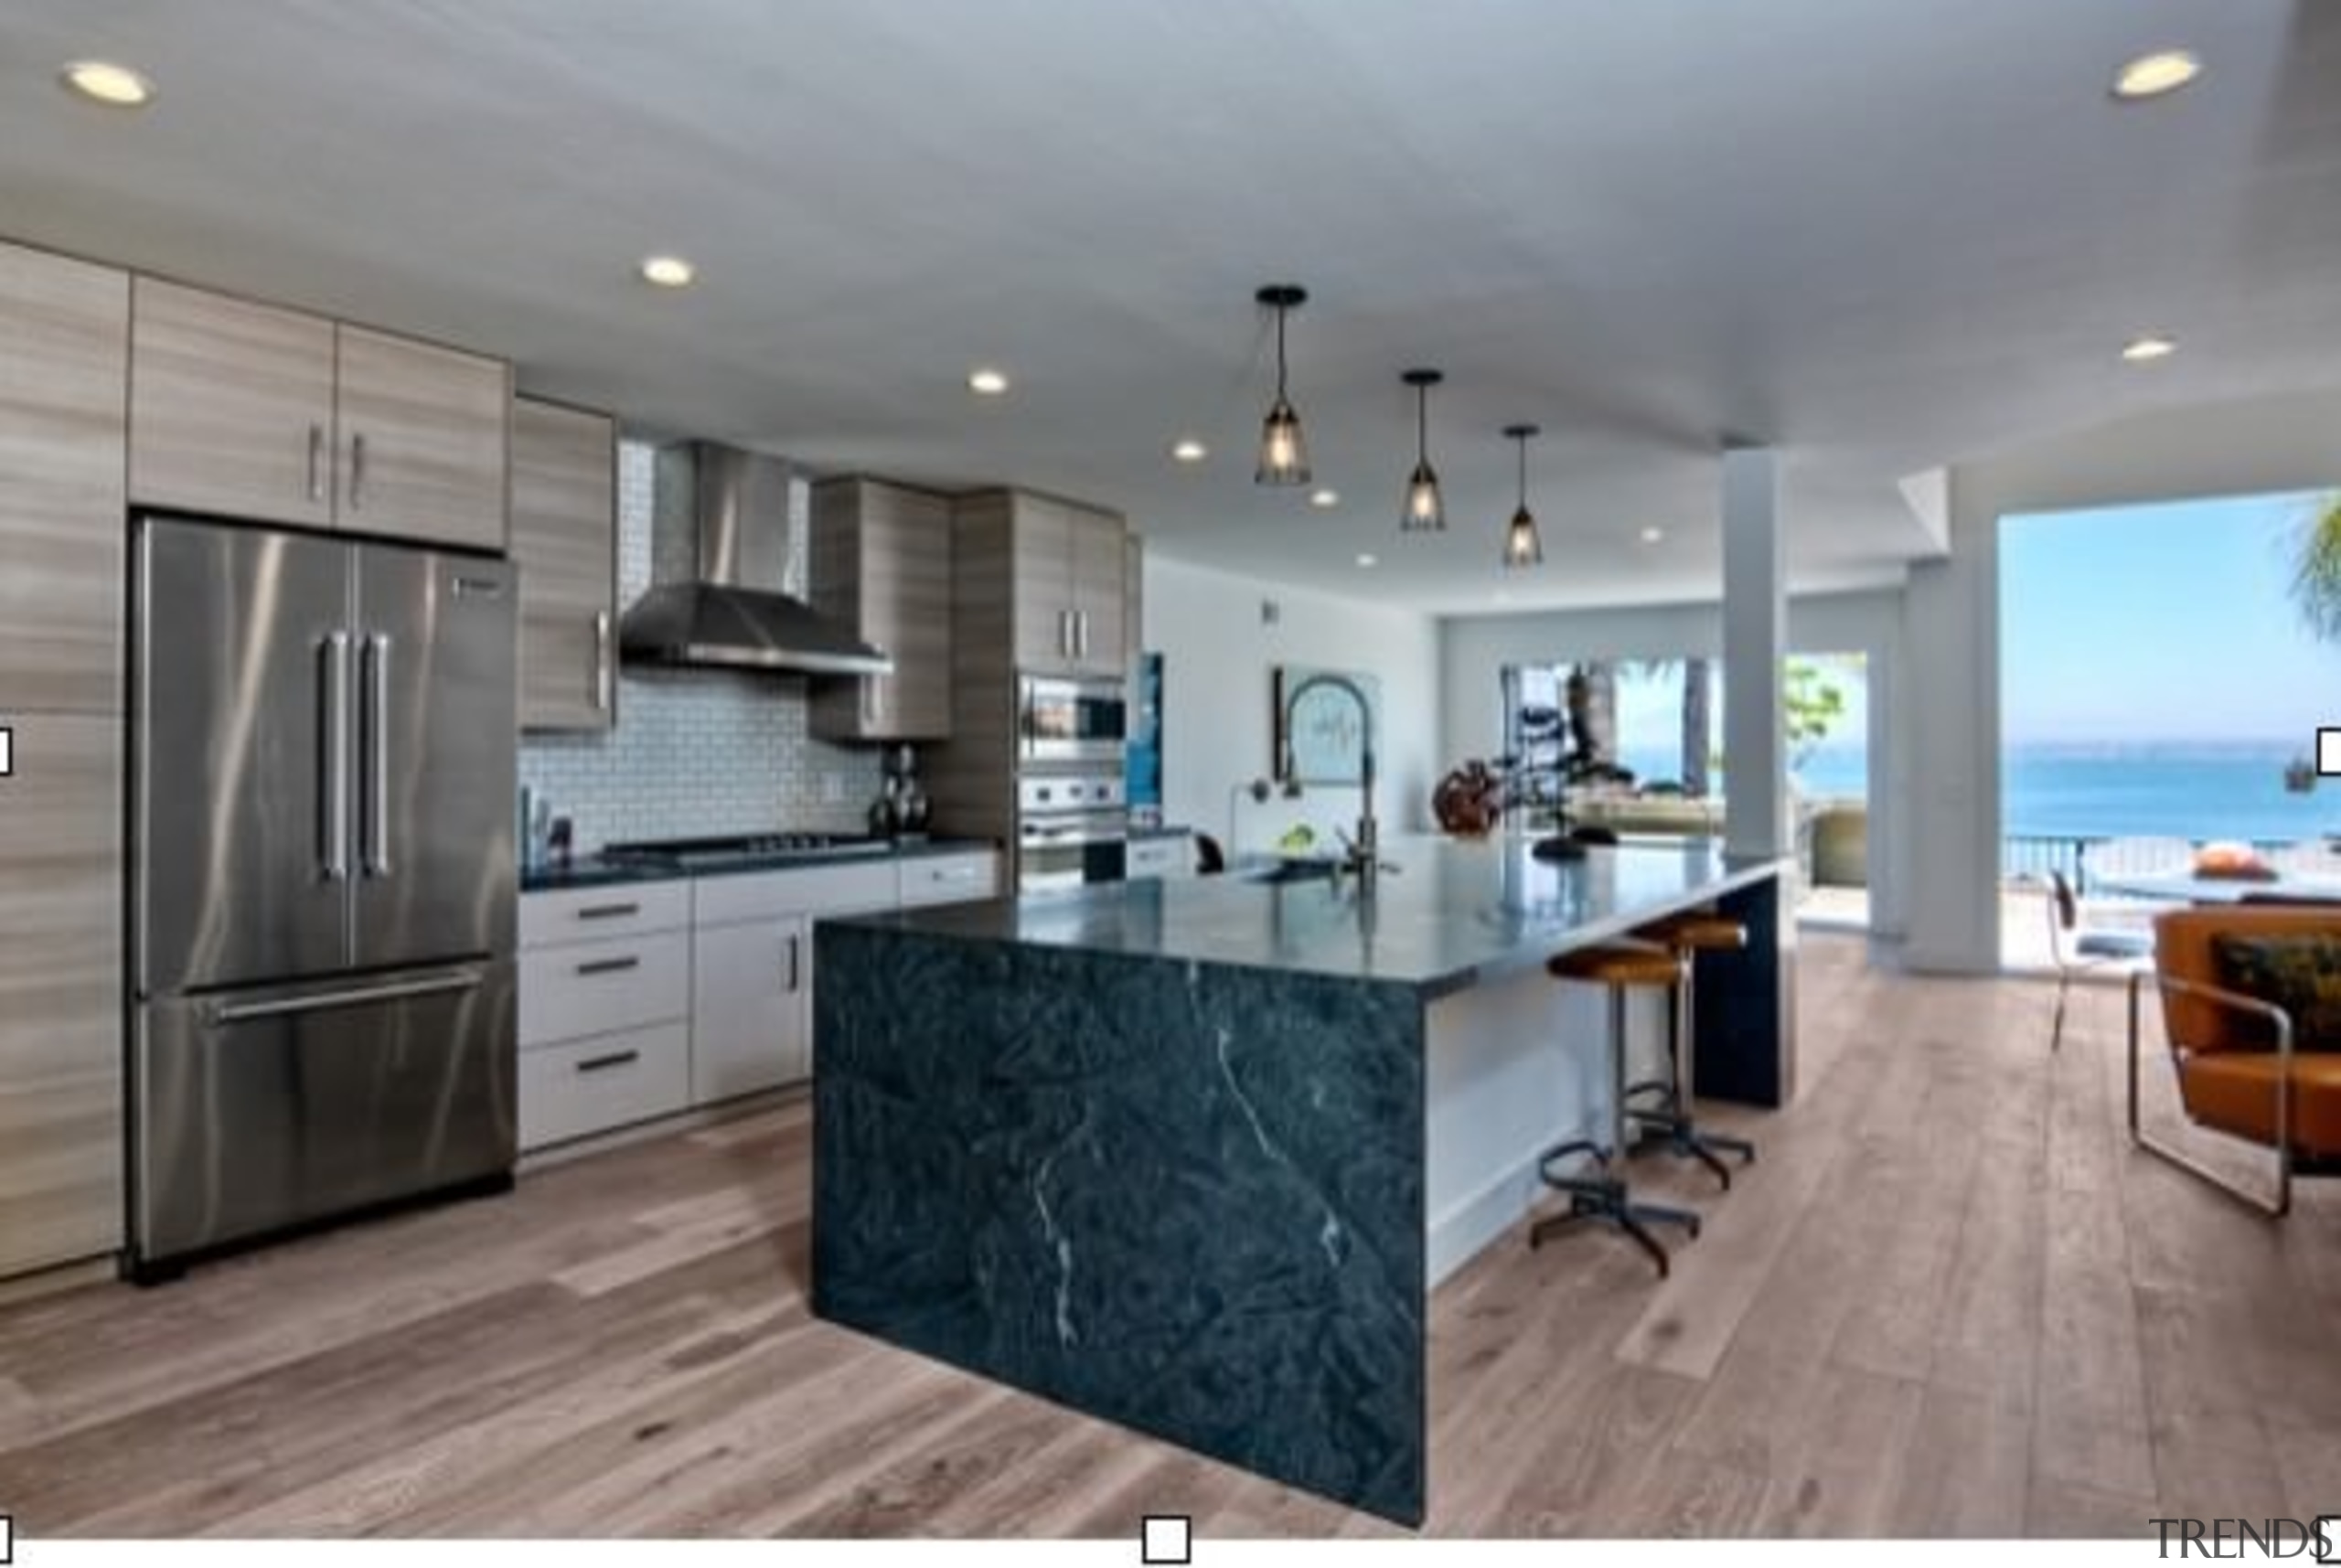 A waterfall island provides space for food prep cabinetry, countertop, cuisine classique, floor, flooring, hardwood, interior design, kitchen, real estate, room, wood flooring, gray